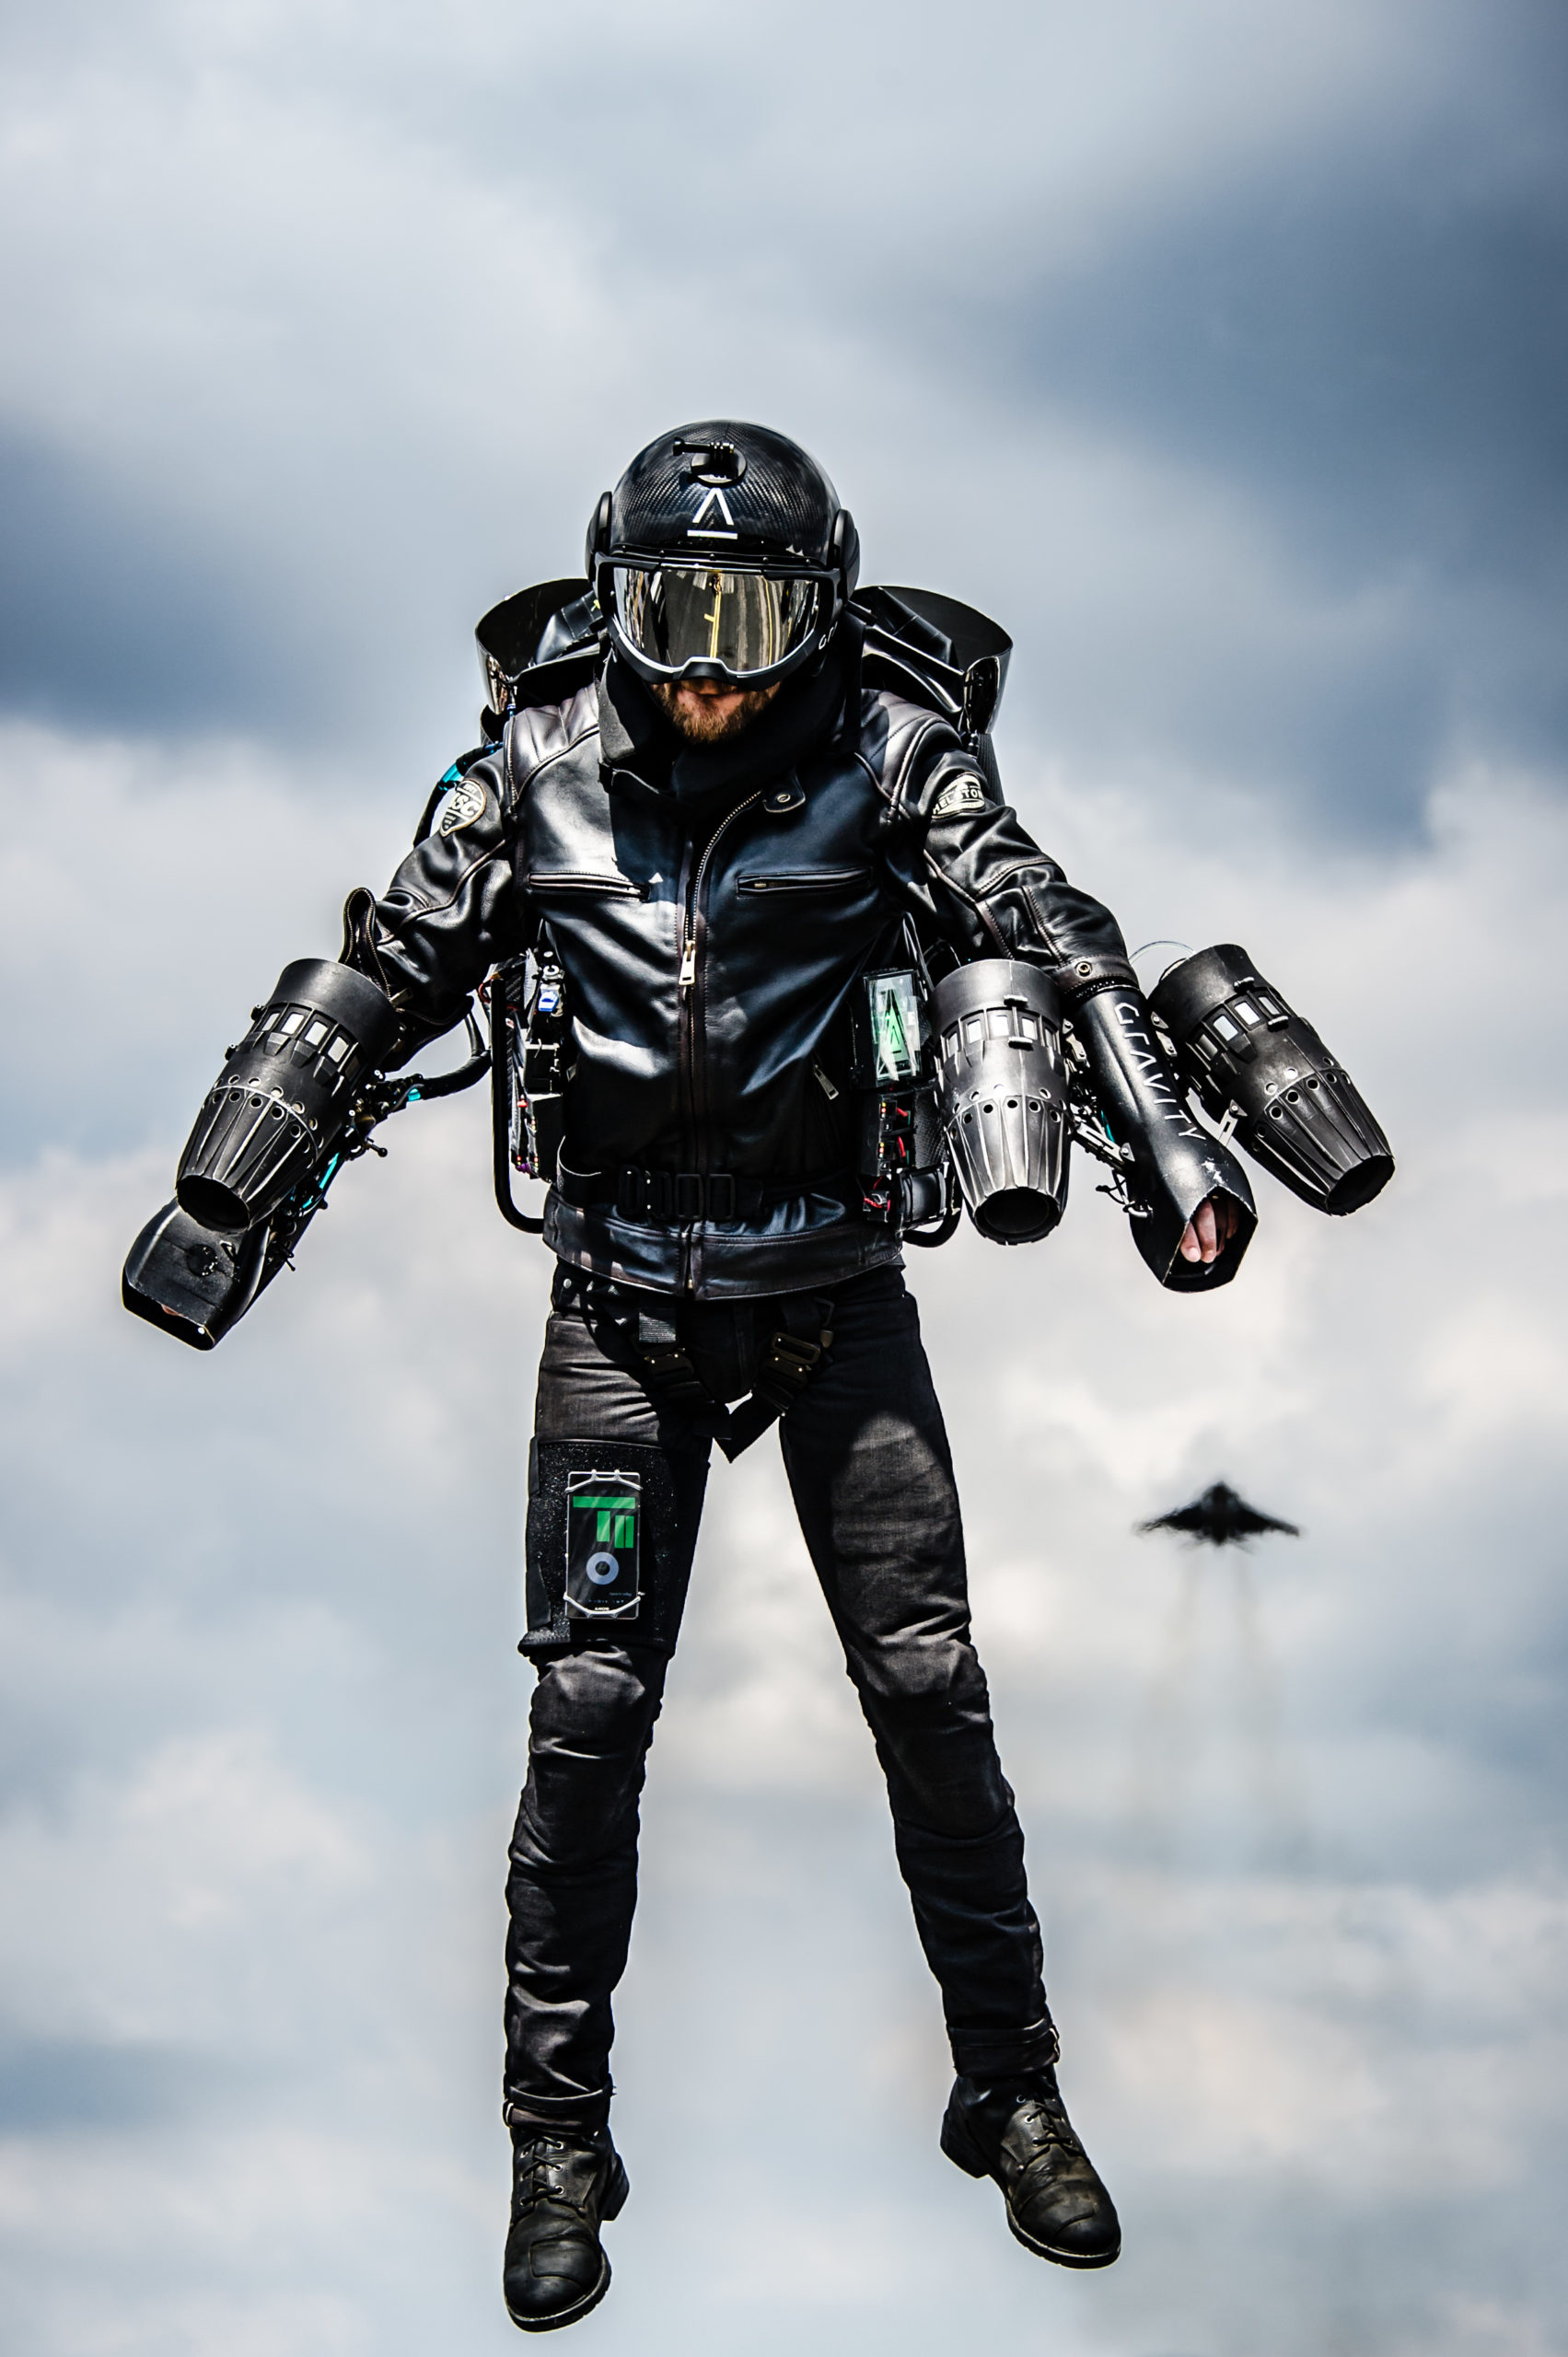 See Gravity Industries' Jet Suit in Action! 